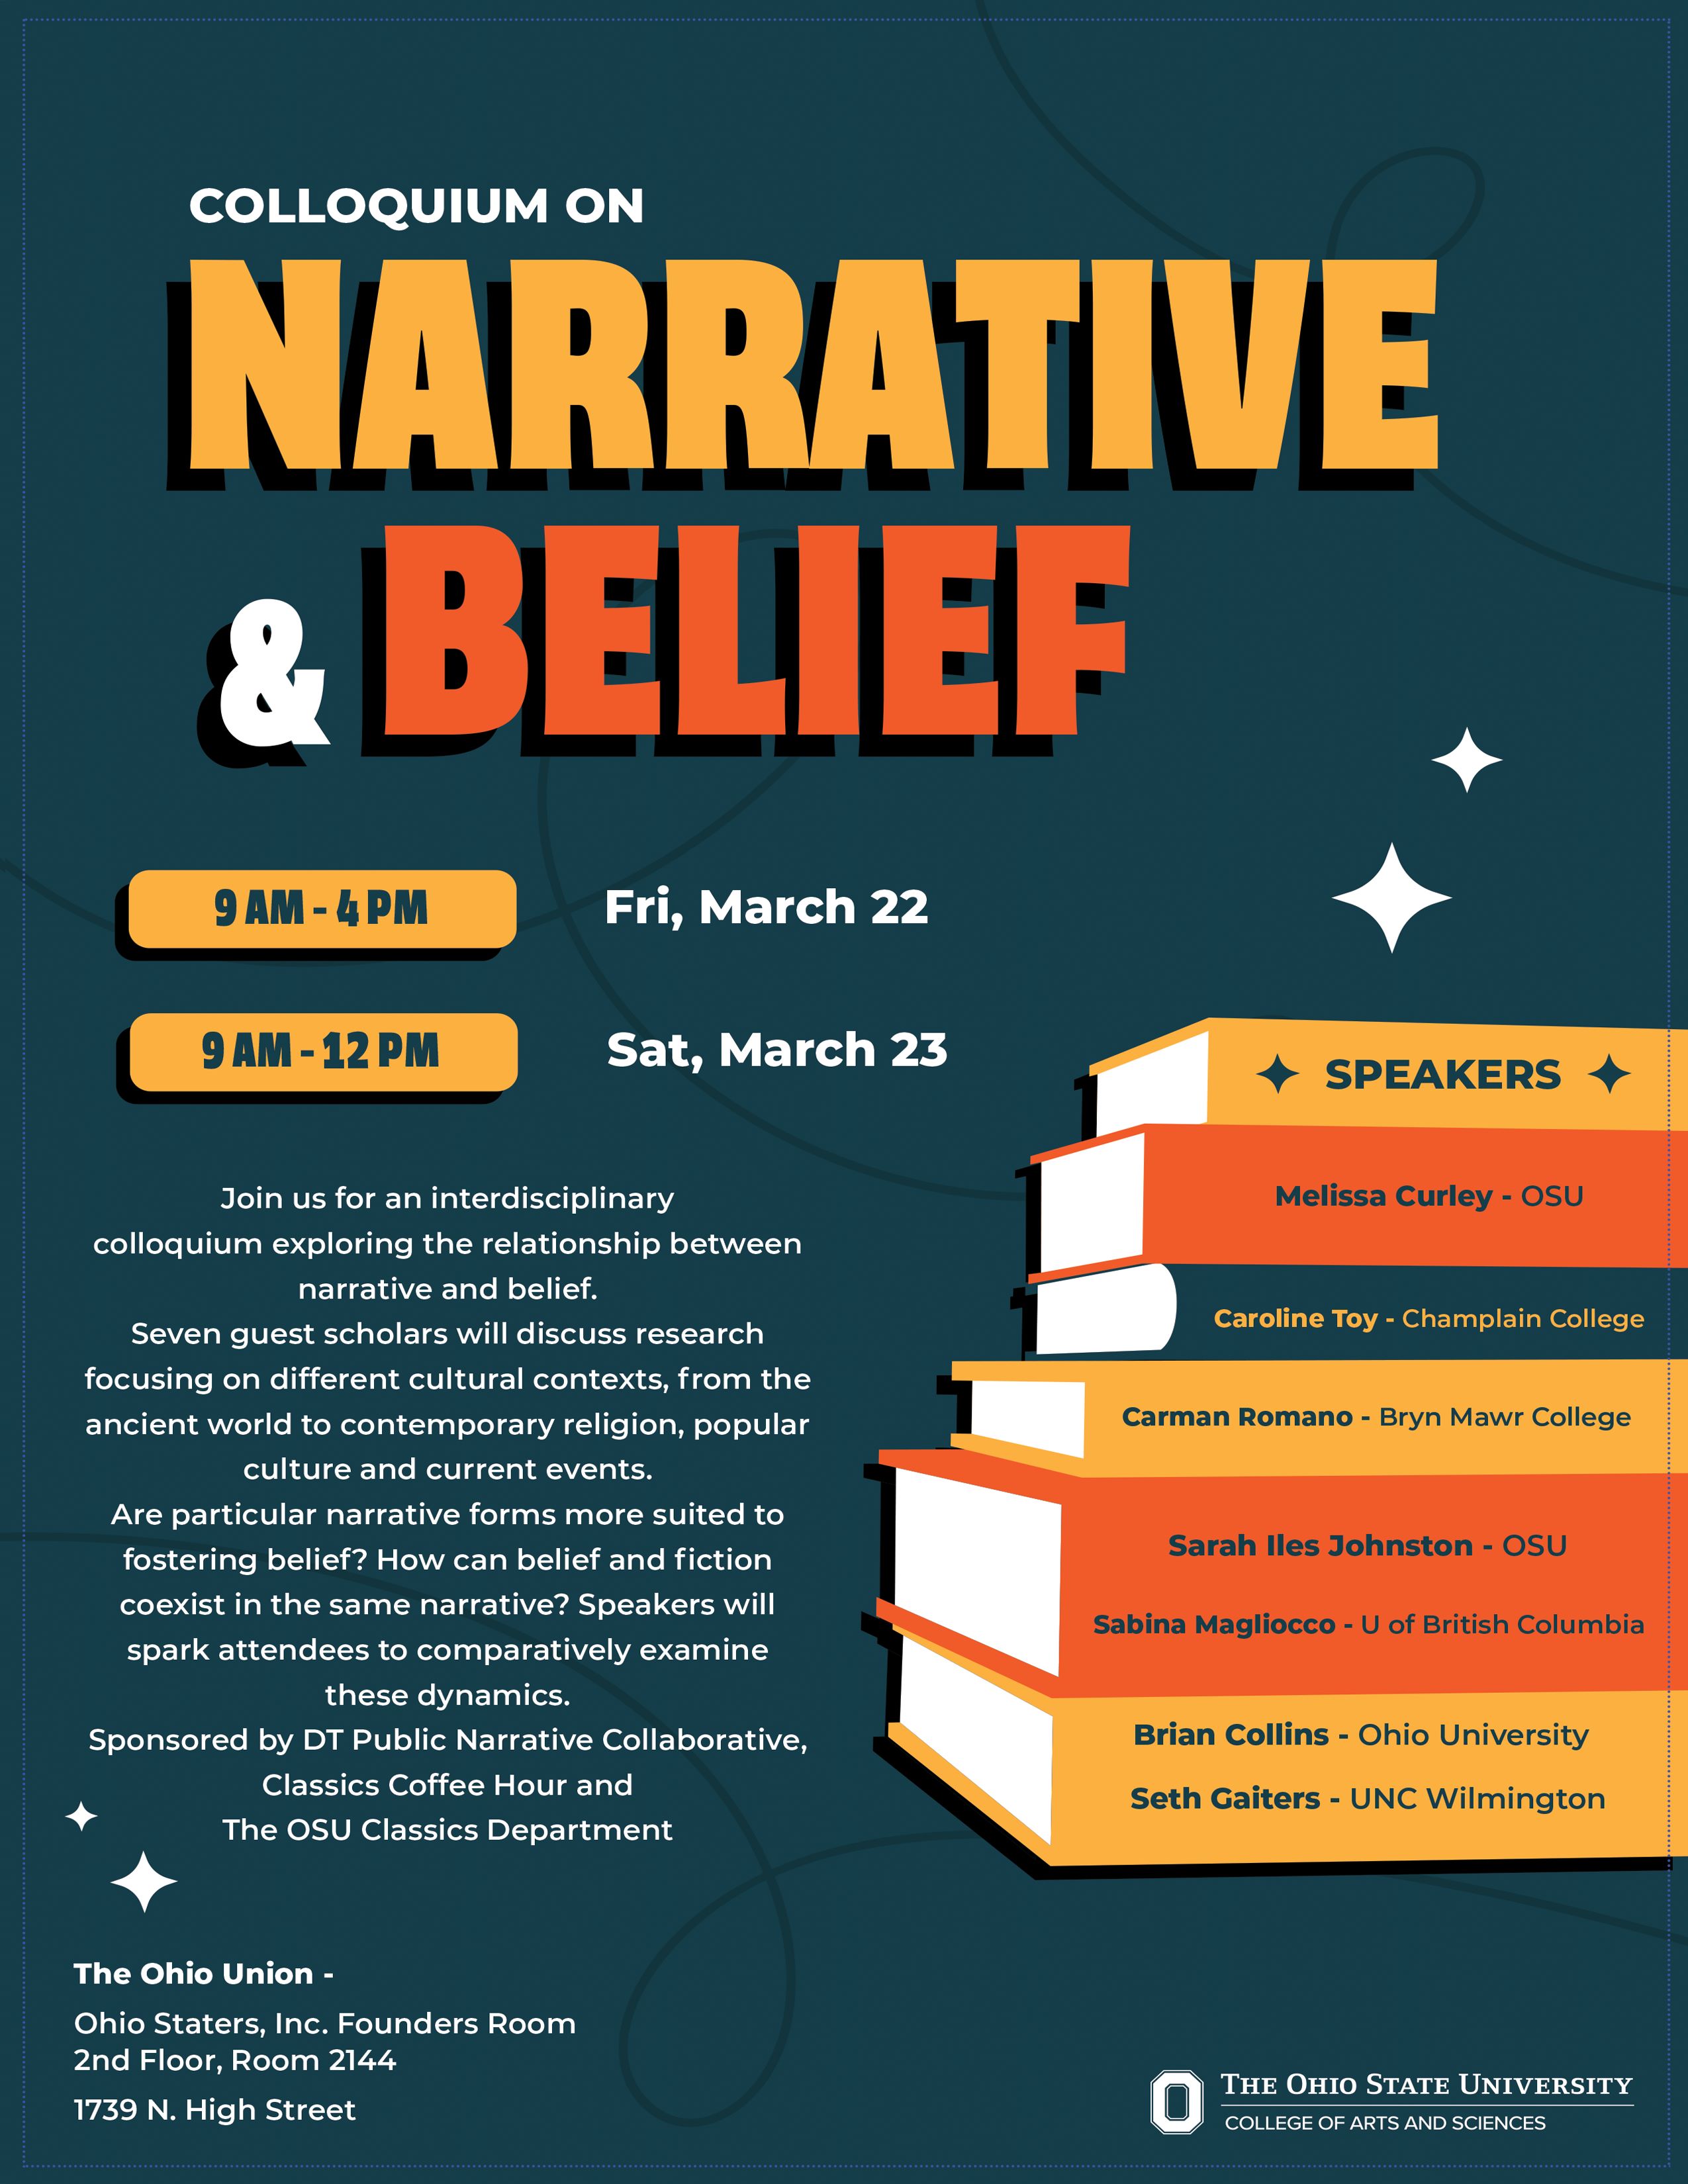 Event flyer for Colloquium on Narrative & Belief